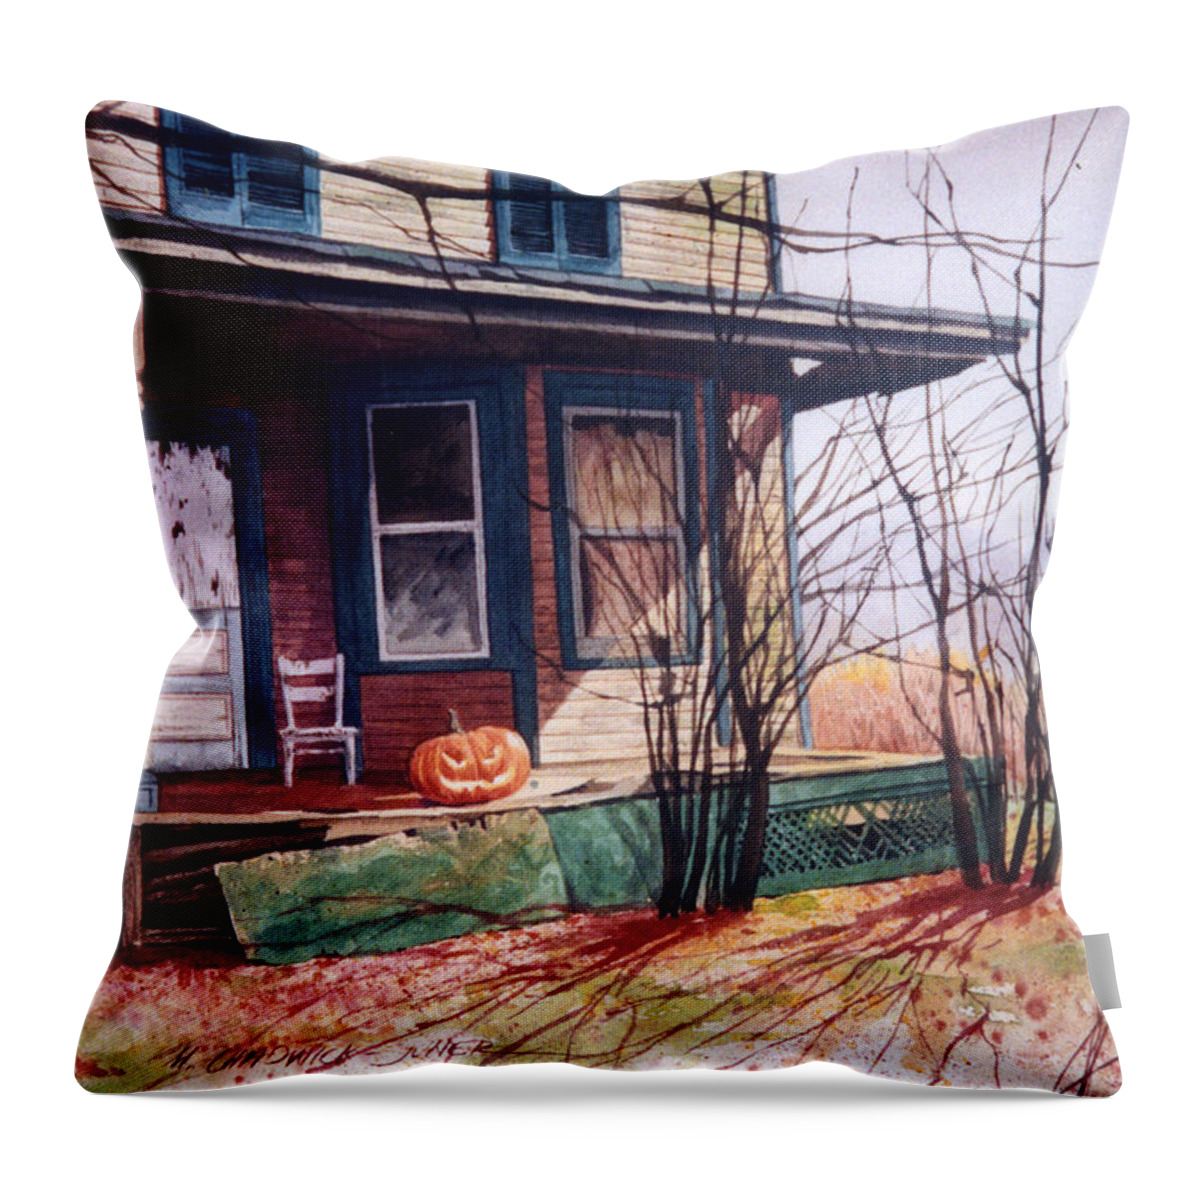 Jack-o-lantern Throw Pillow featuring the painting Boo's House by Marguerite Chadwick-Juner